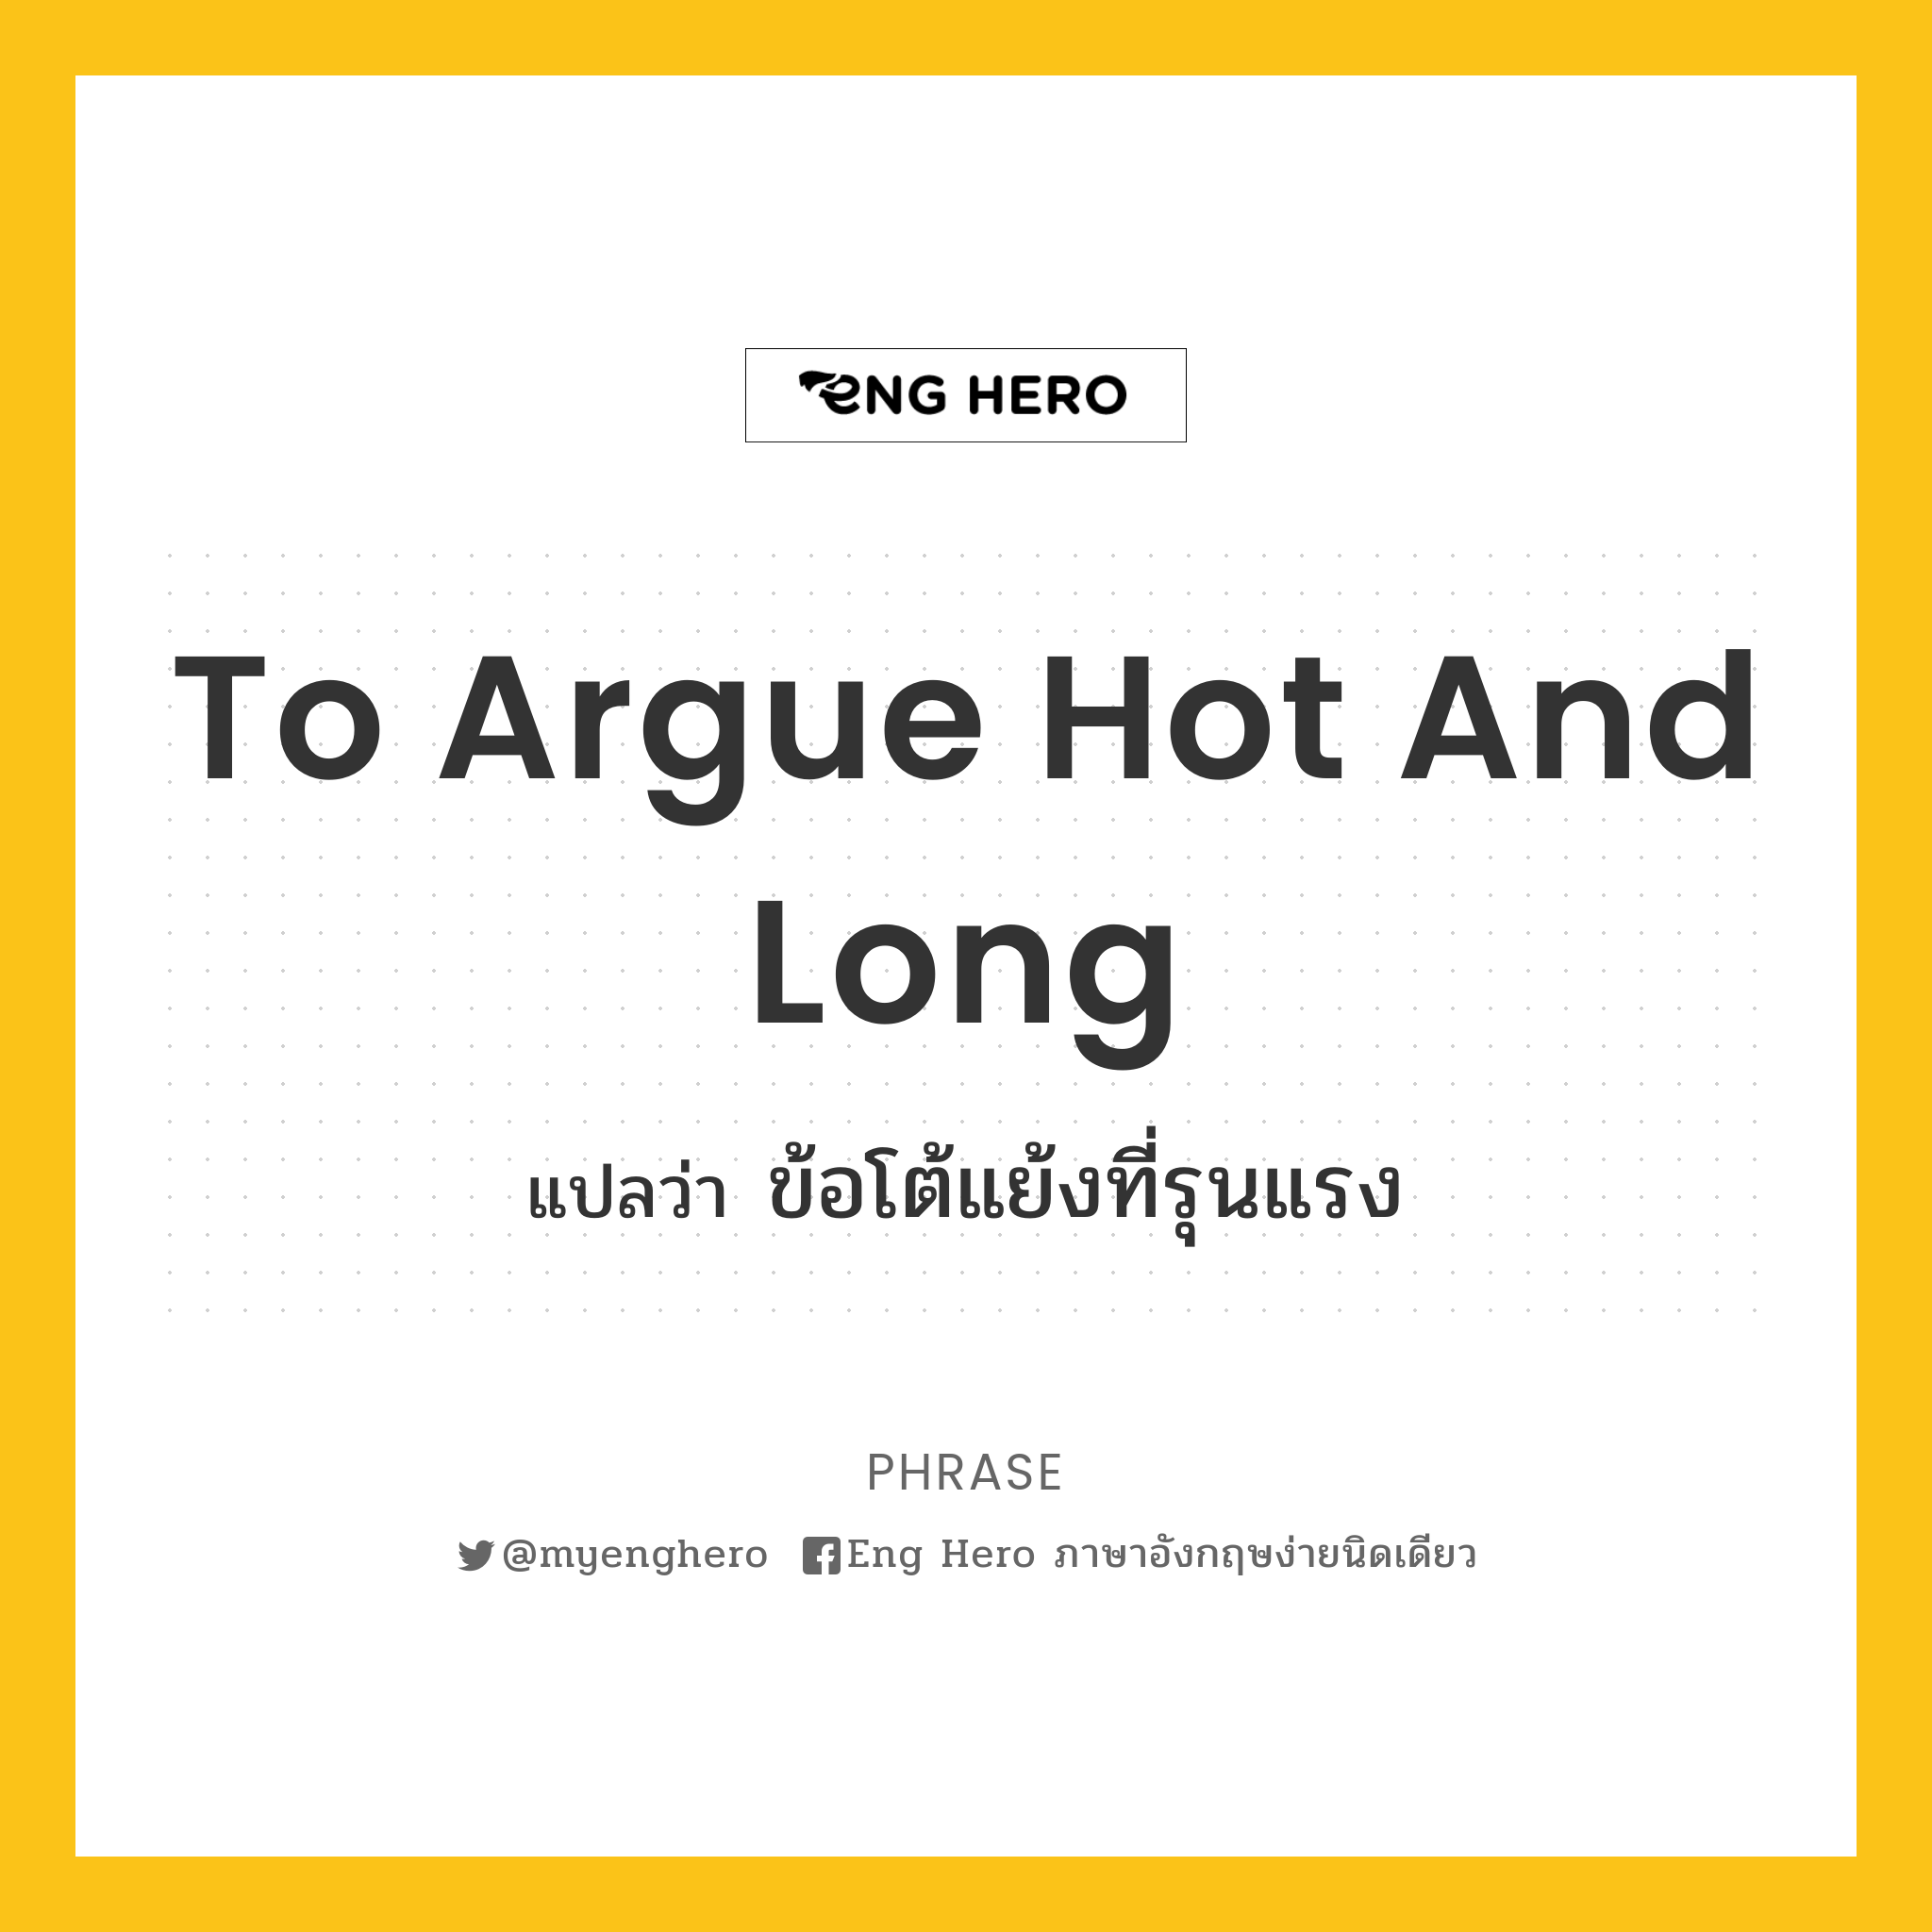 To argue hot and long